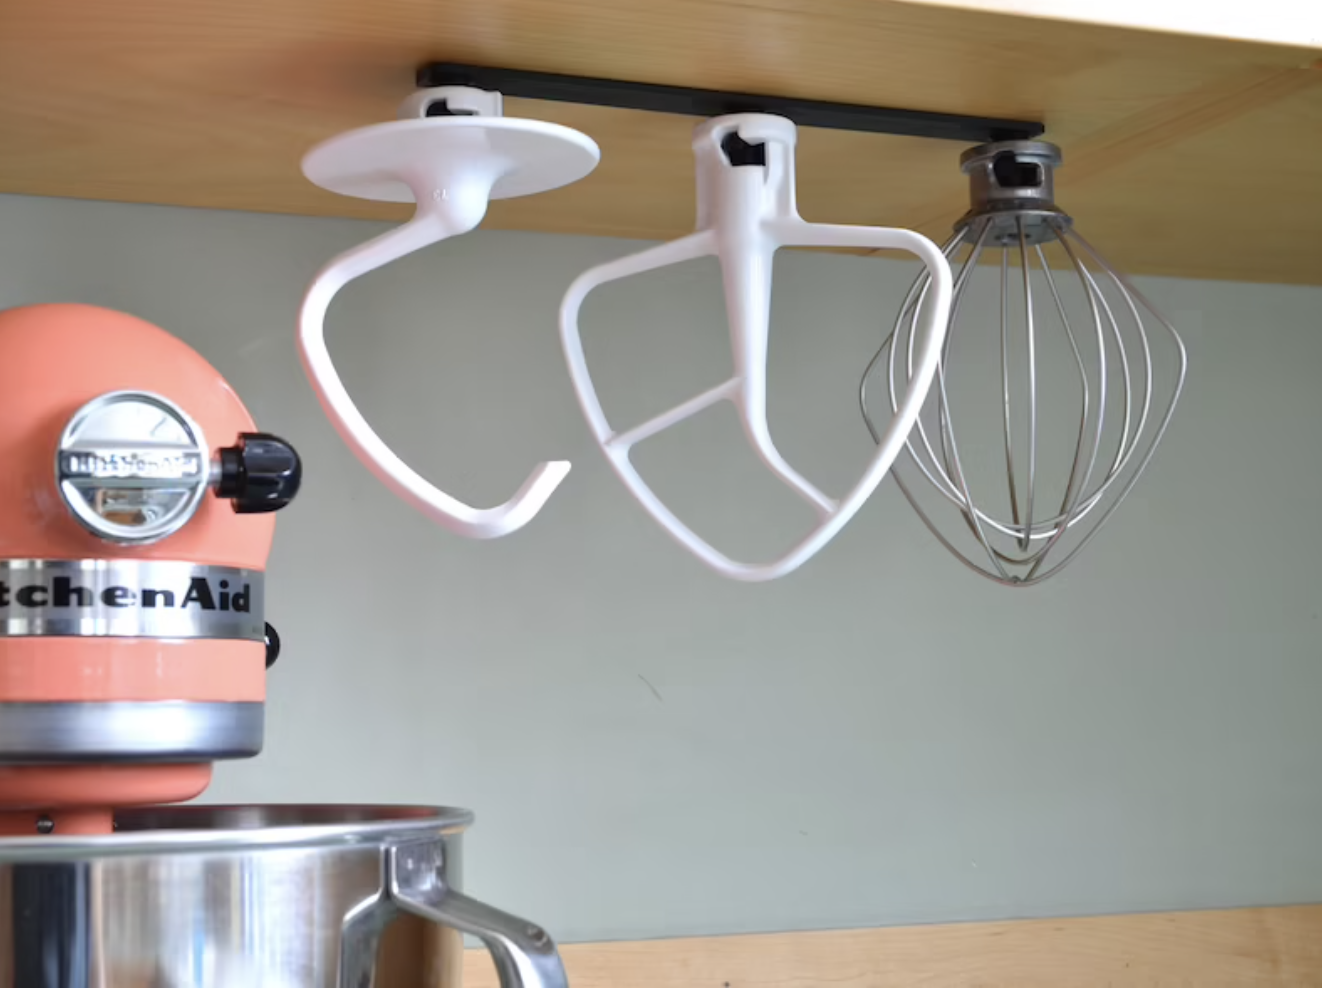 the mount under a cabinet holding three KitchenAid mixer attachments